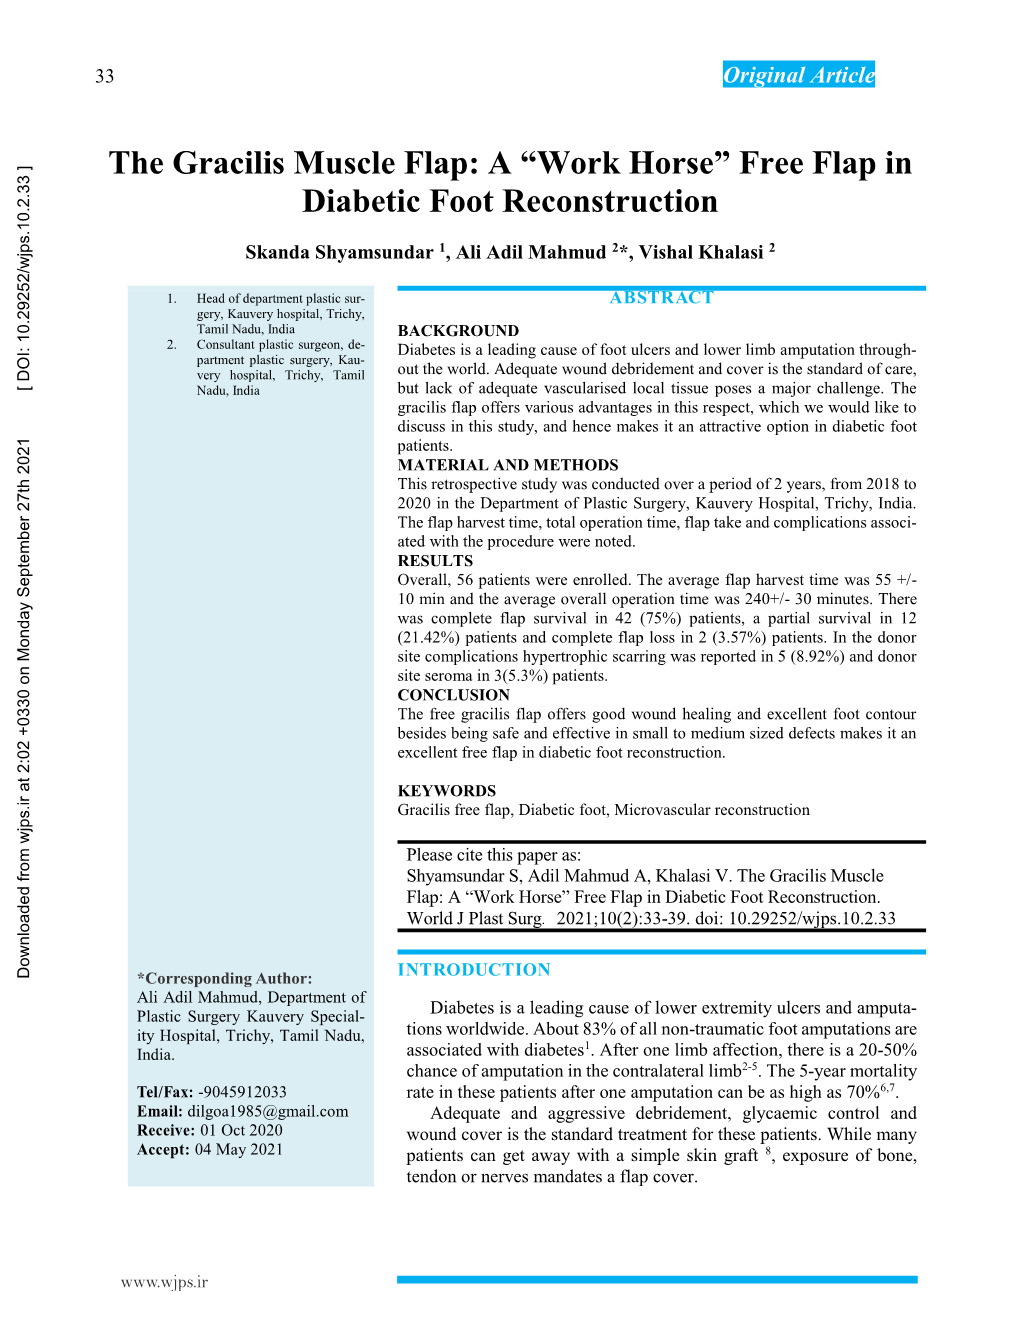 Free Flap in Diabetic Foot Reconstruction